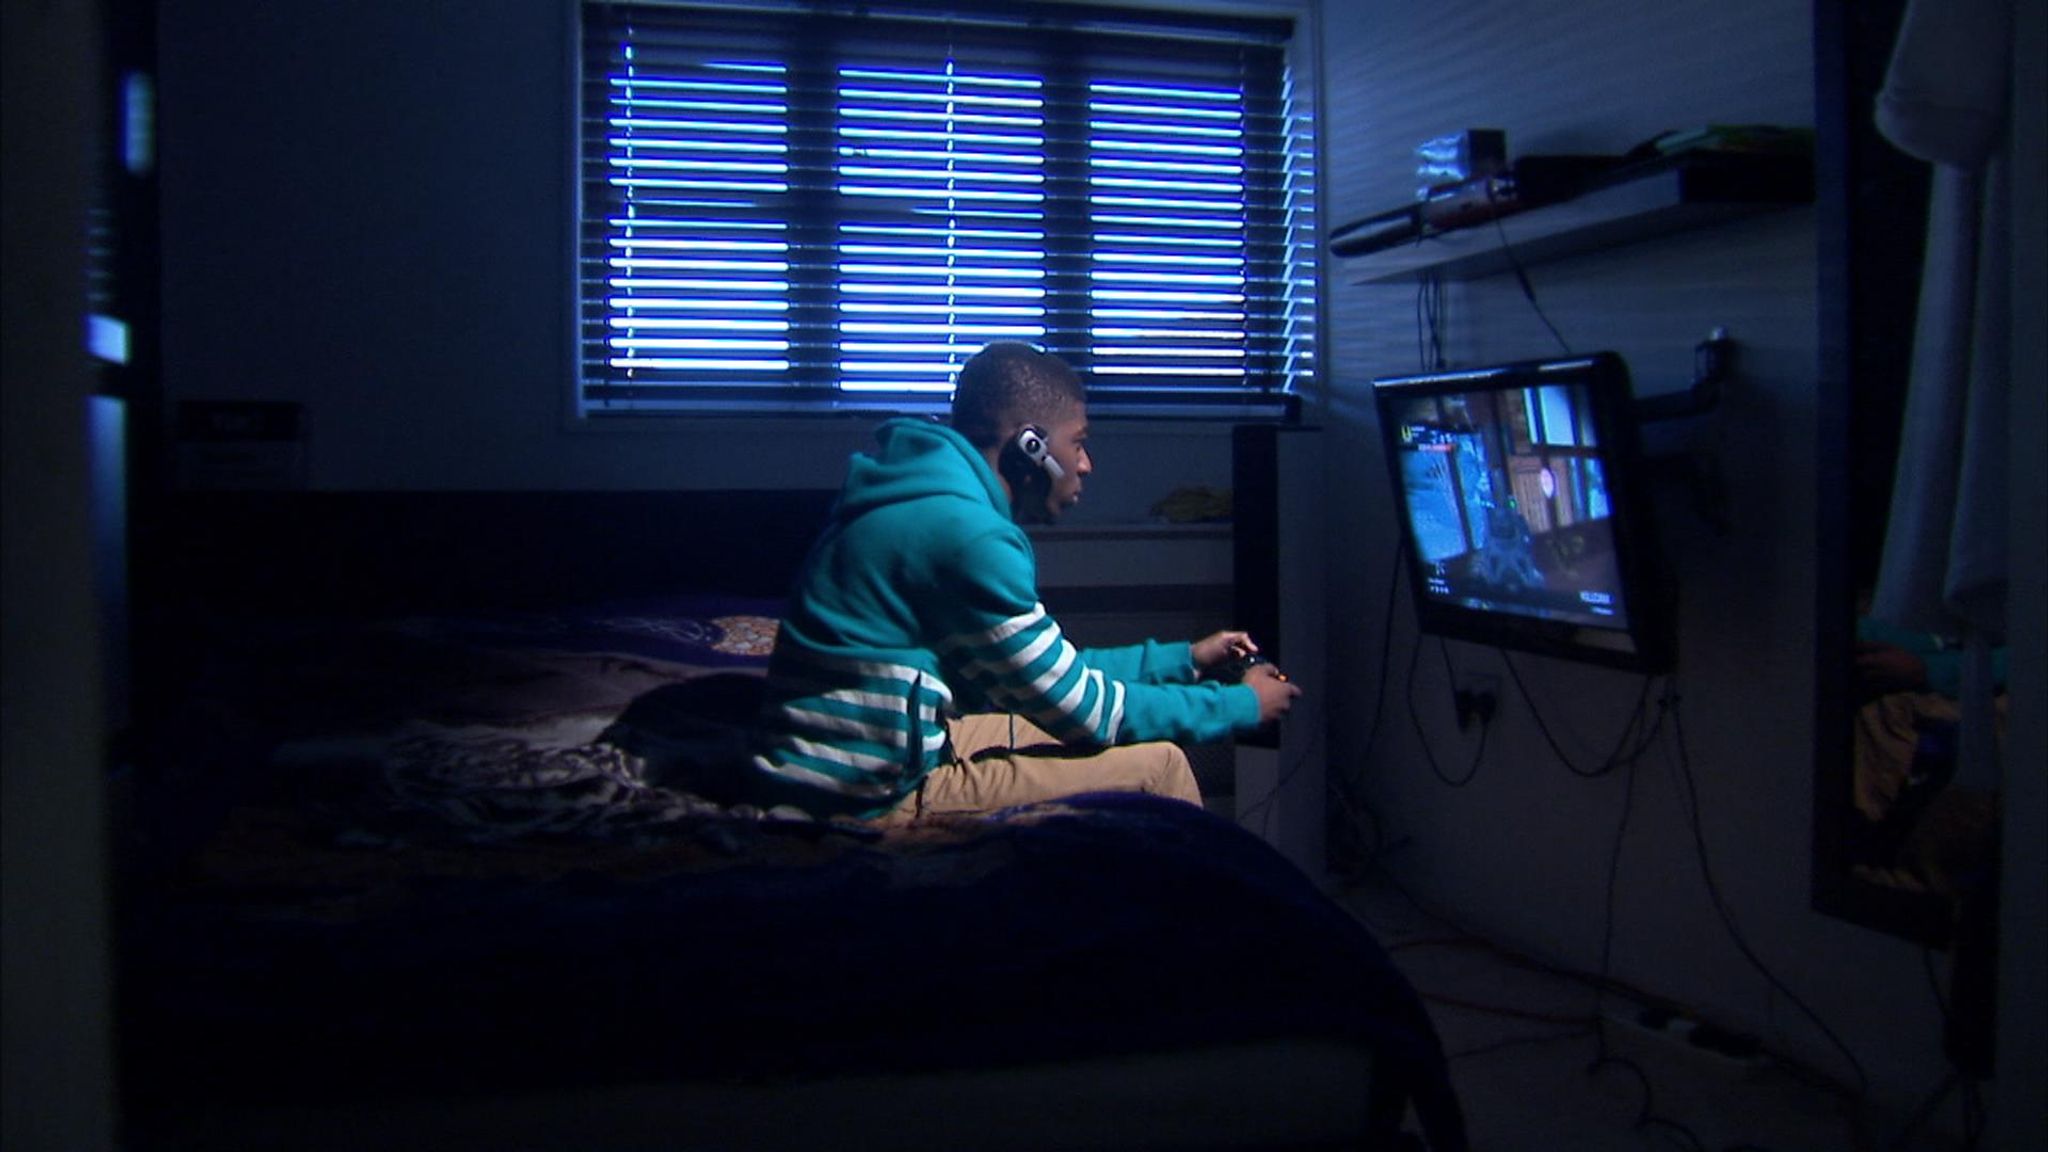 Video Game Addiction Could Be Made An Official Disease By